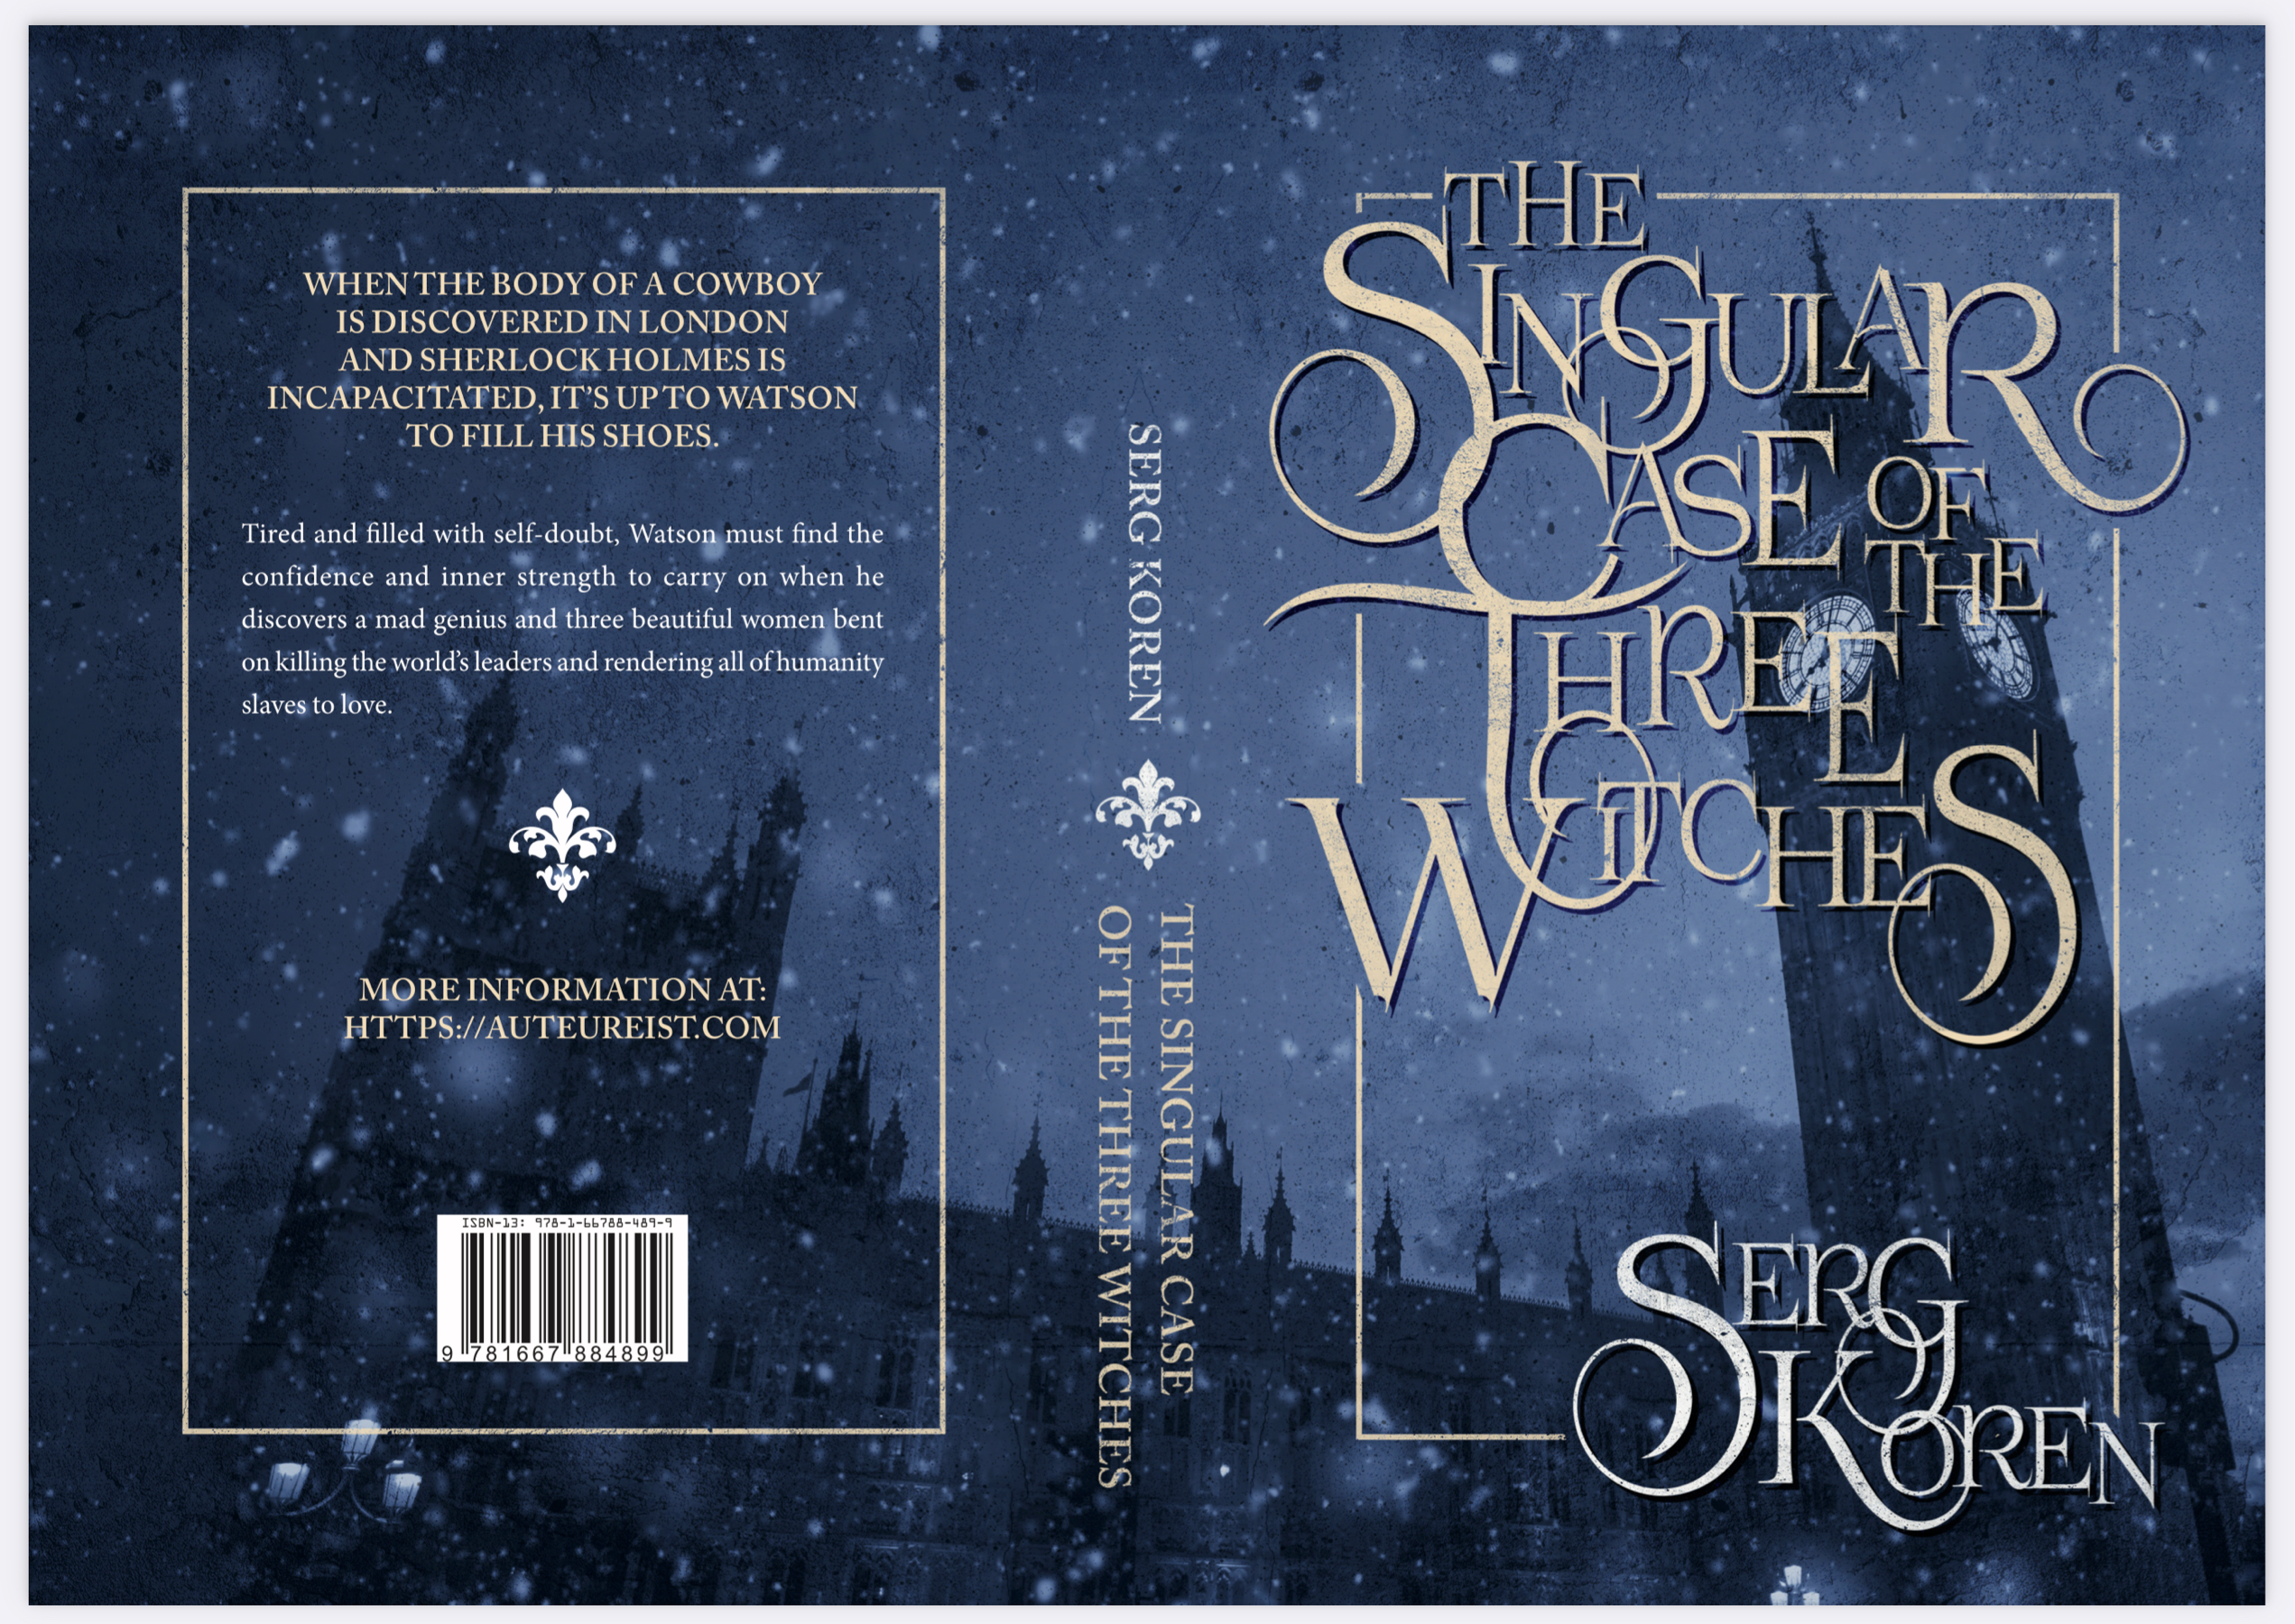 Cover: "The Singular Case of the Three Witches"